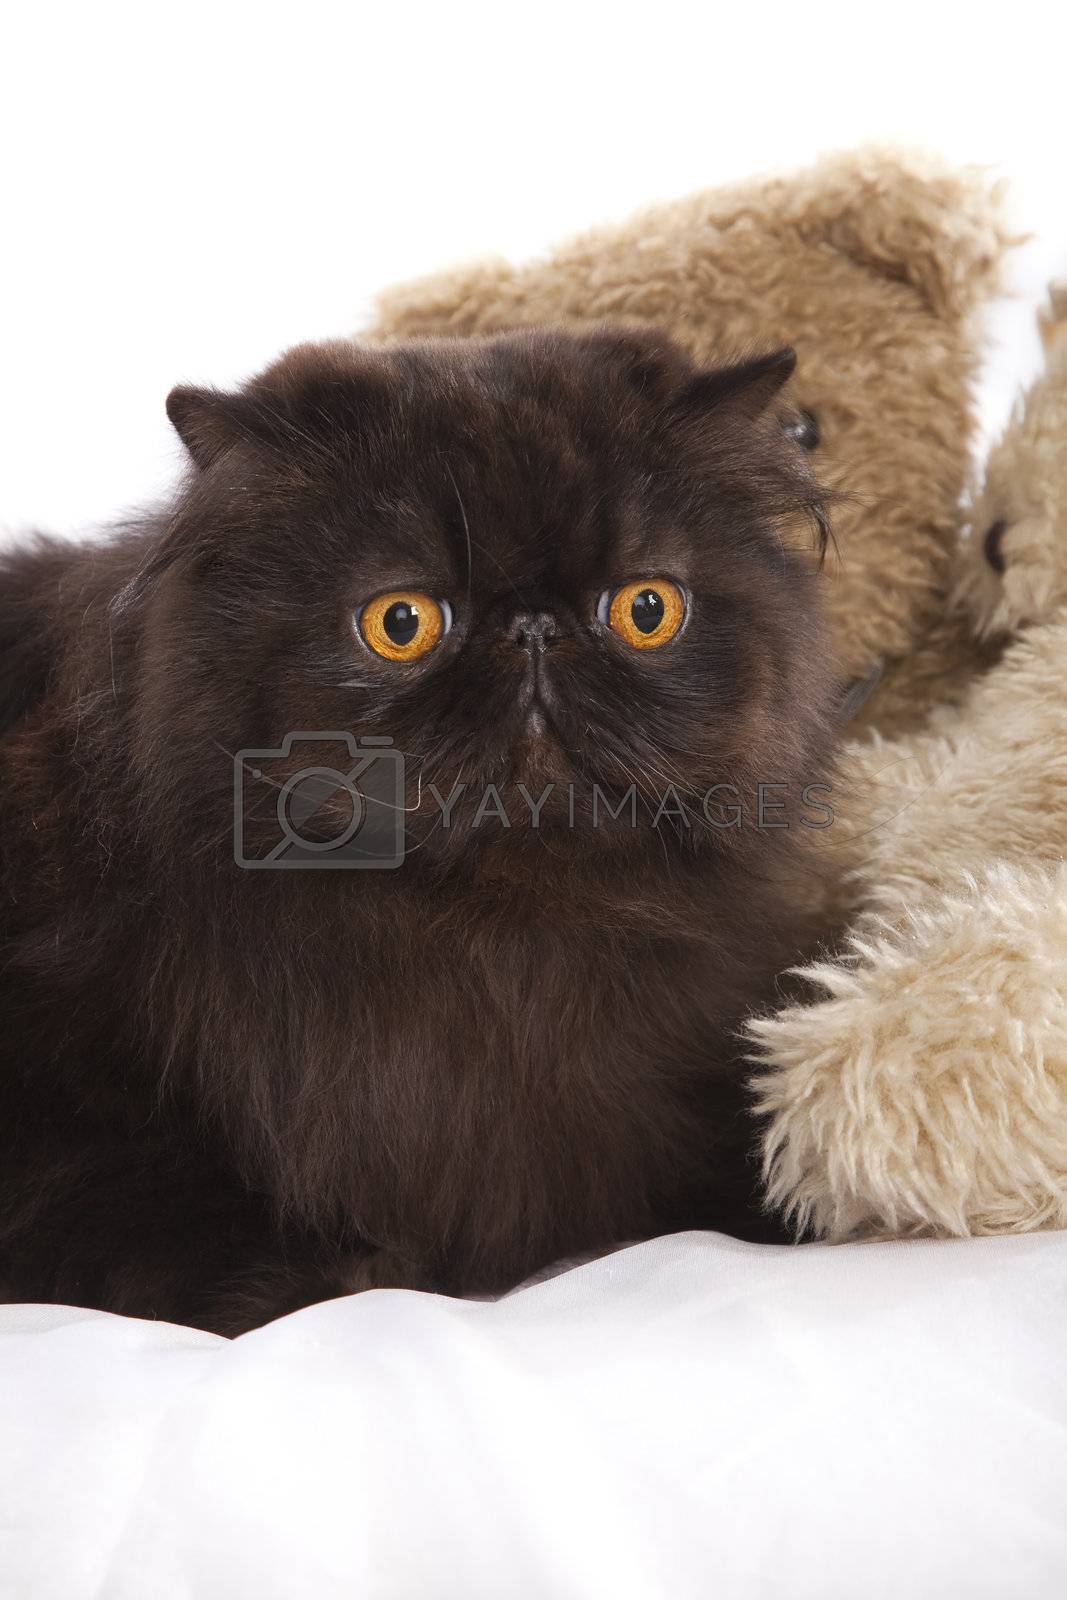 Royalty free image of Long haired persian cat by mjp